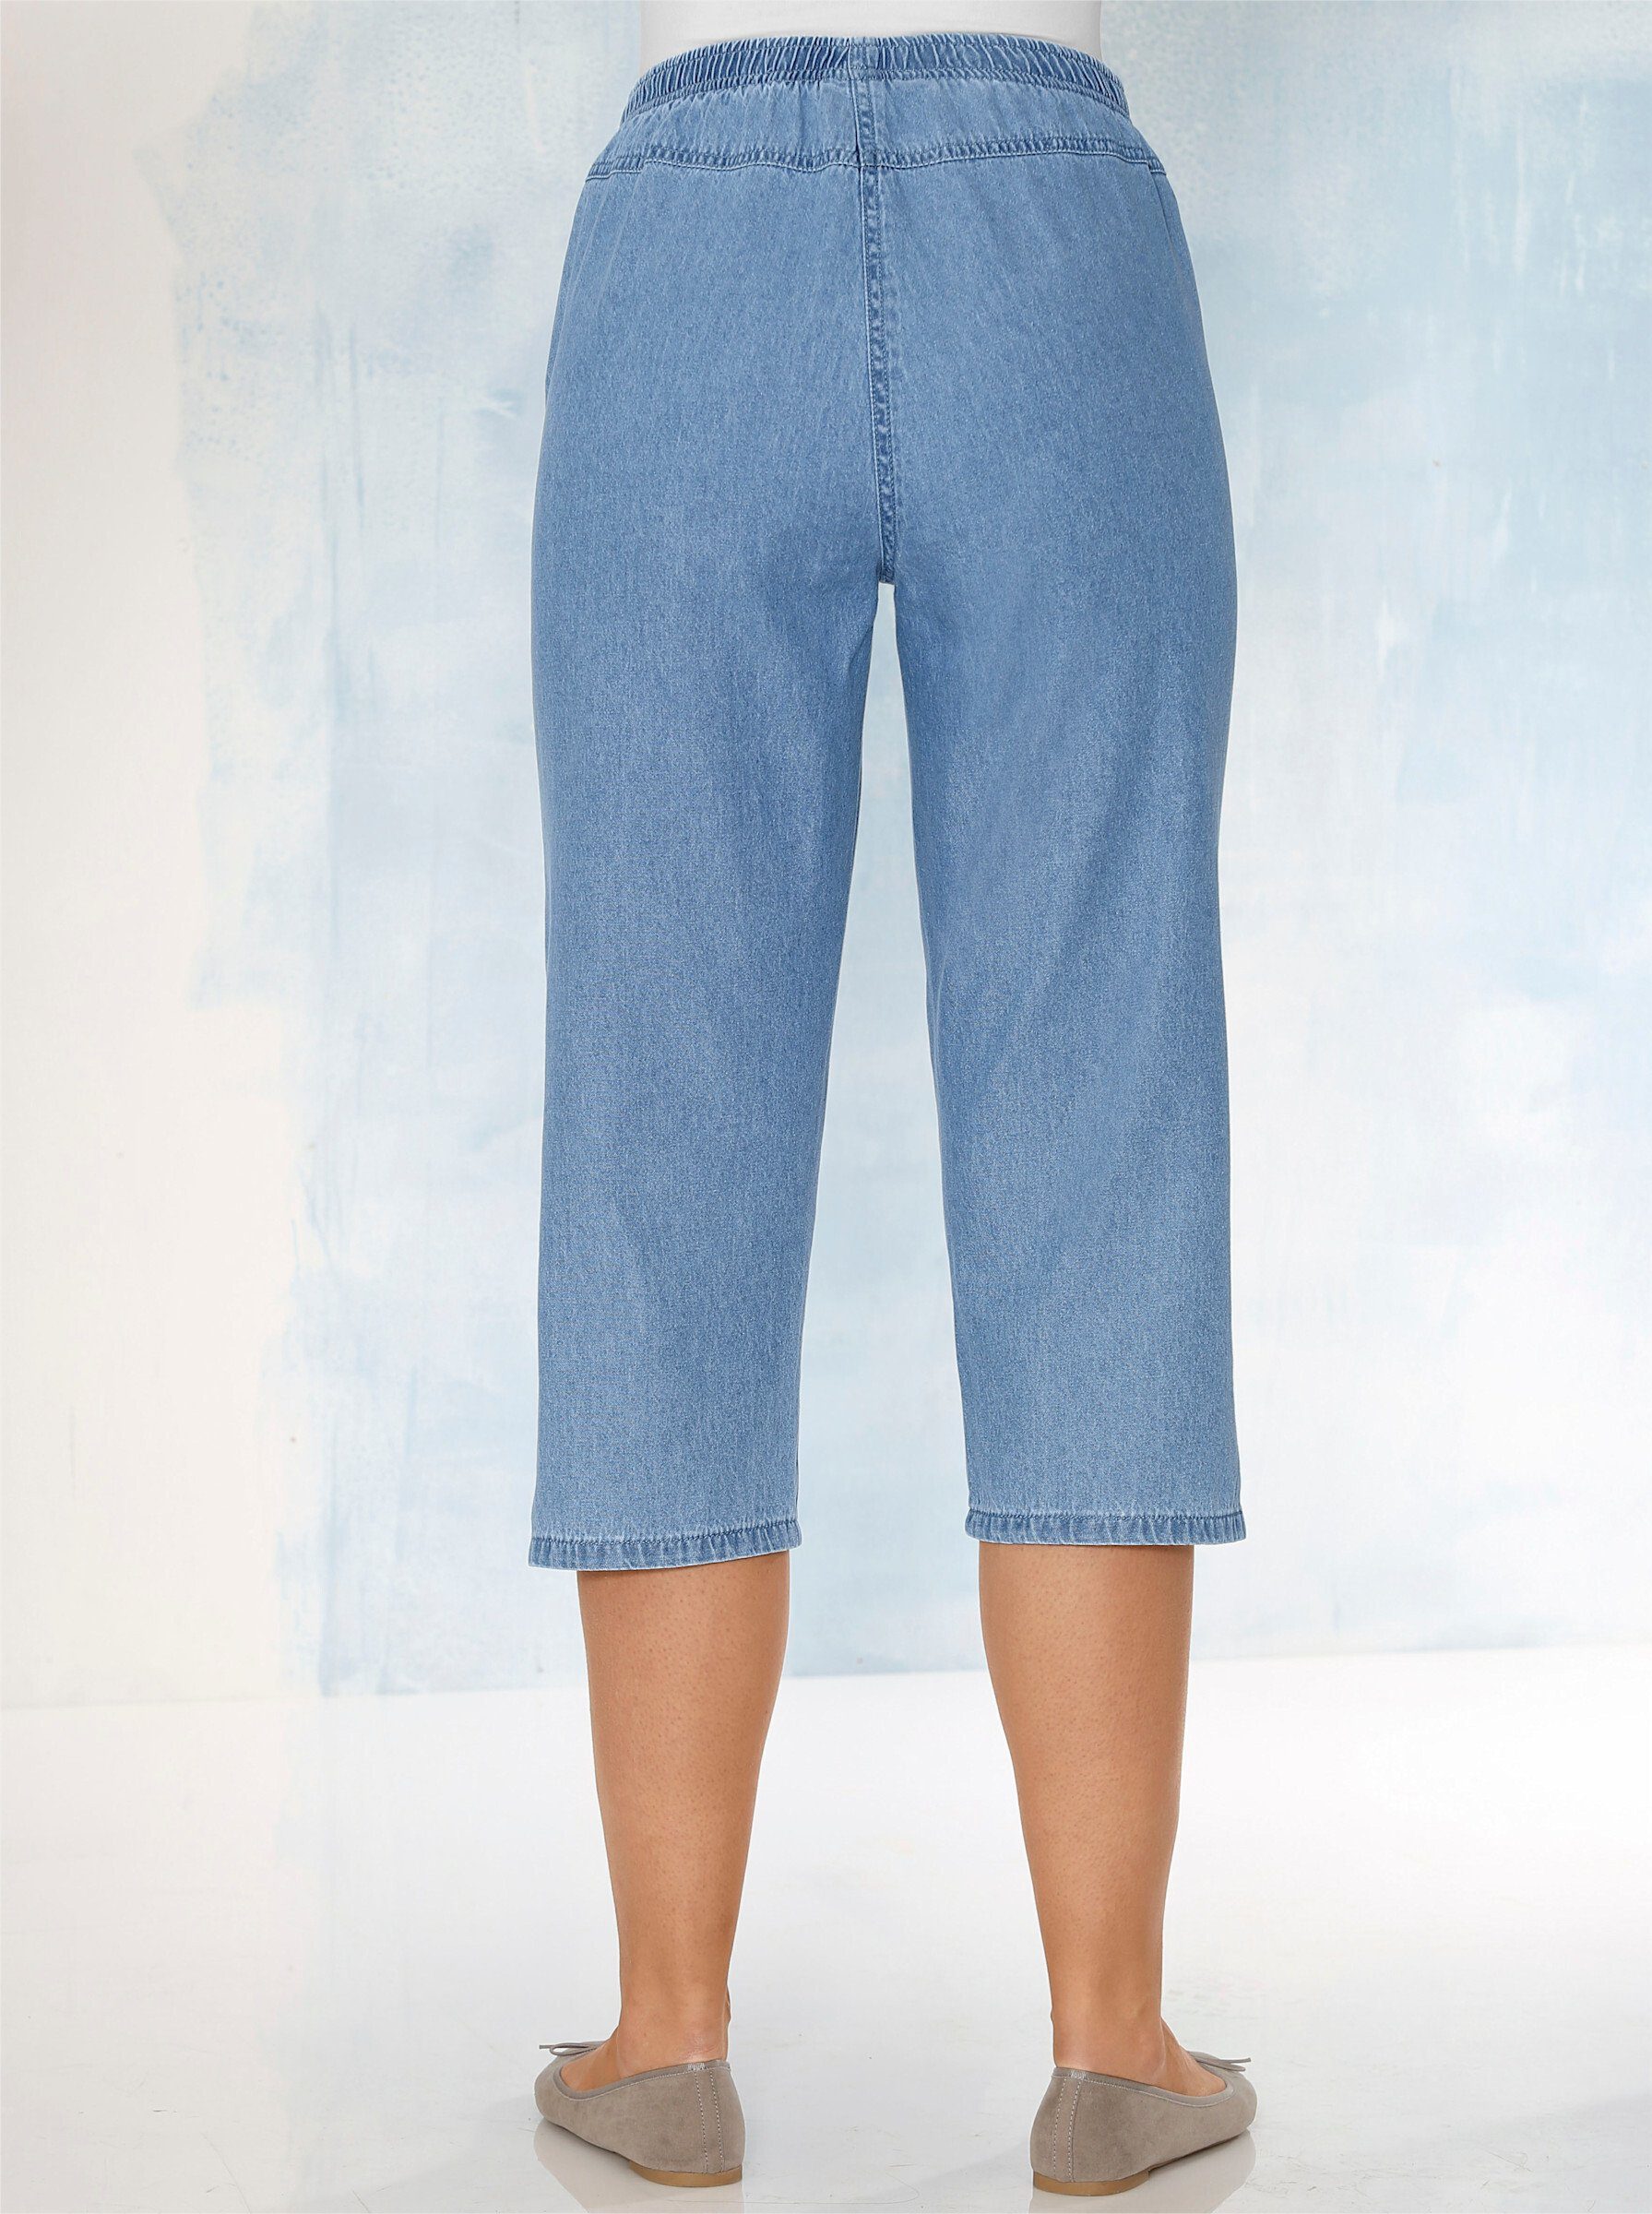 Jeansshorts blue-bleached Sieh an!